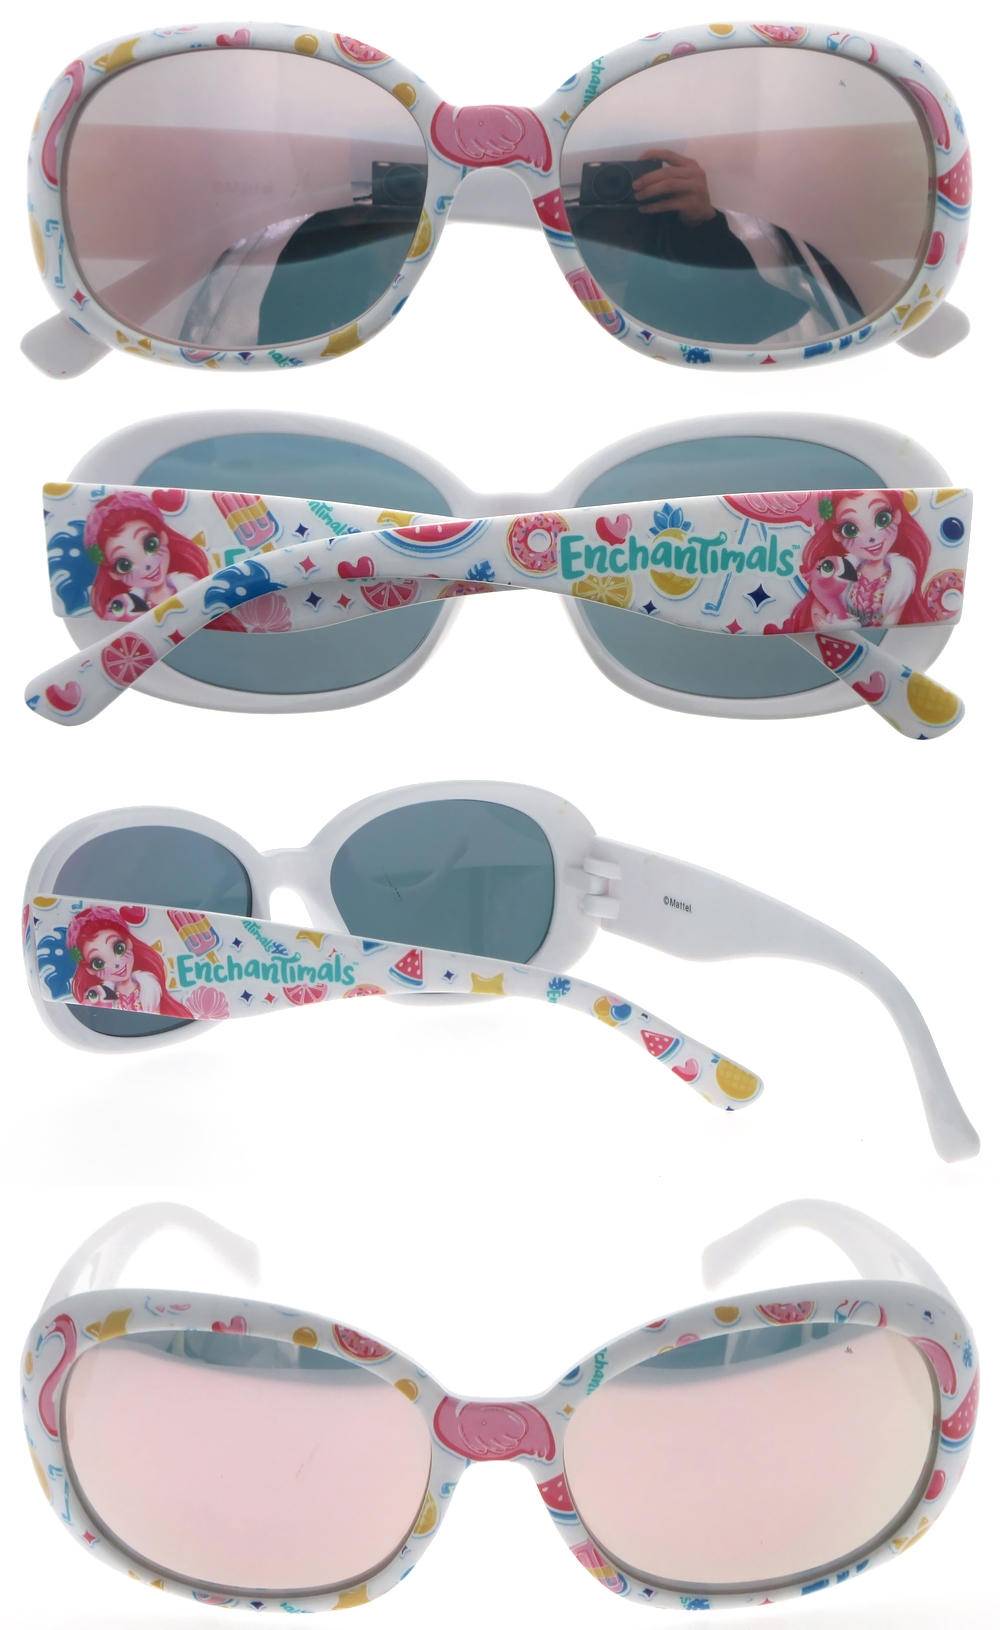 Dachuan Optical DSPK342036 China Manufacture Factory Cute Sports Style Kids Sunglasses with Pattern Frame (2)